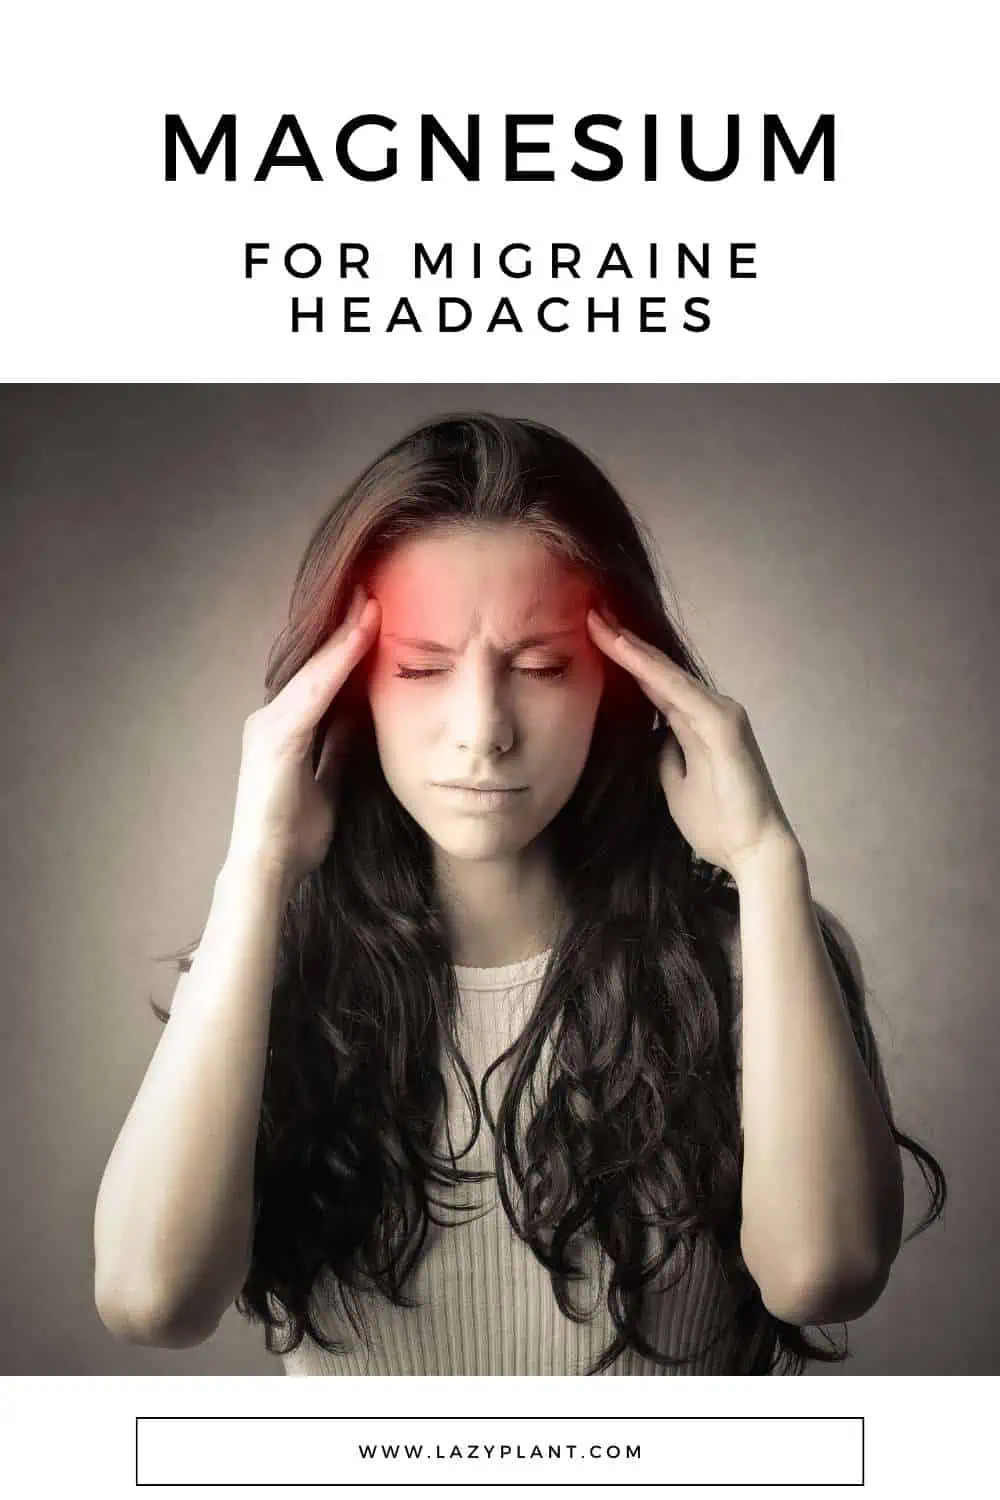 Why do I need magnesium supplements to relieve migraine headaches?